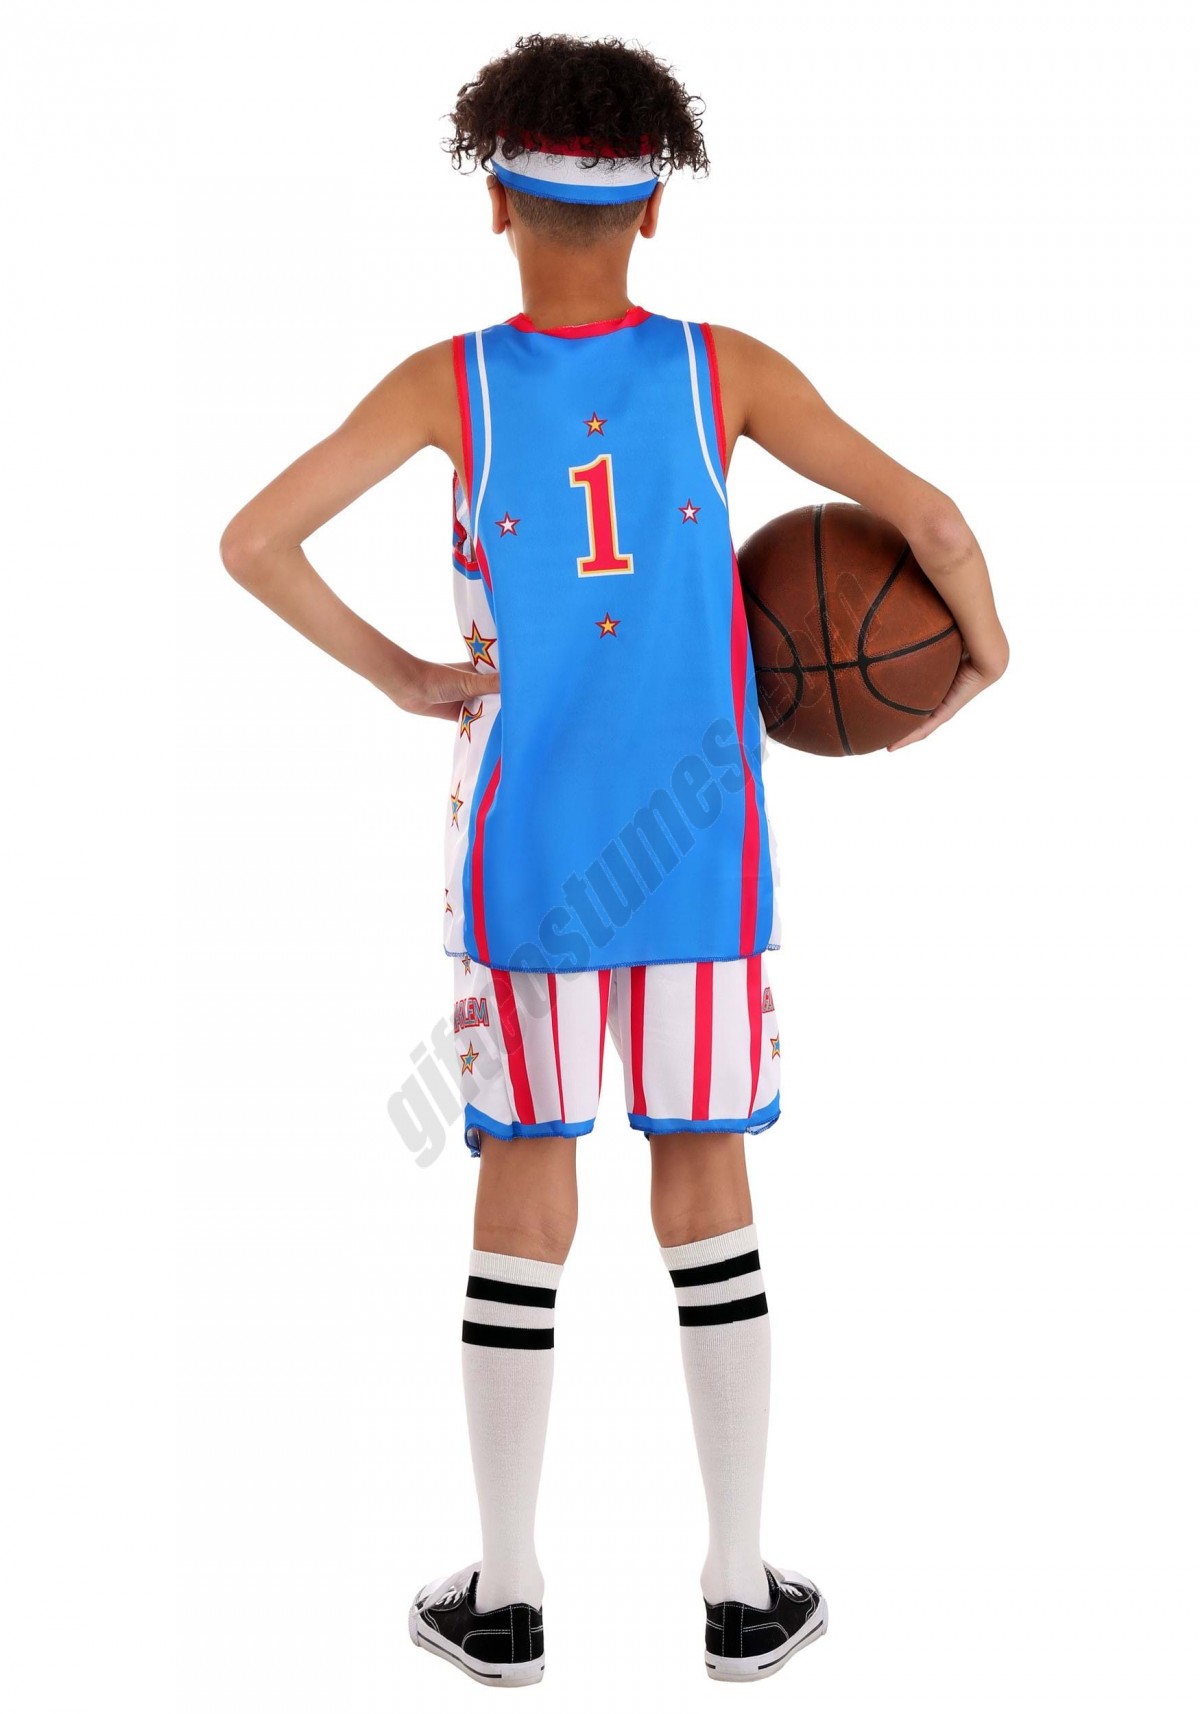 Teen's Harlem Globetrotters Costume Promotions - -5